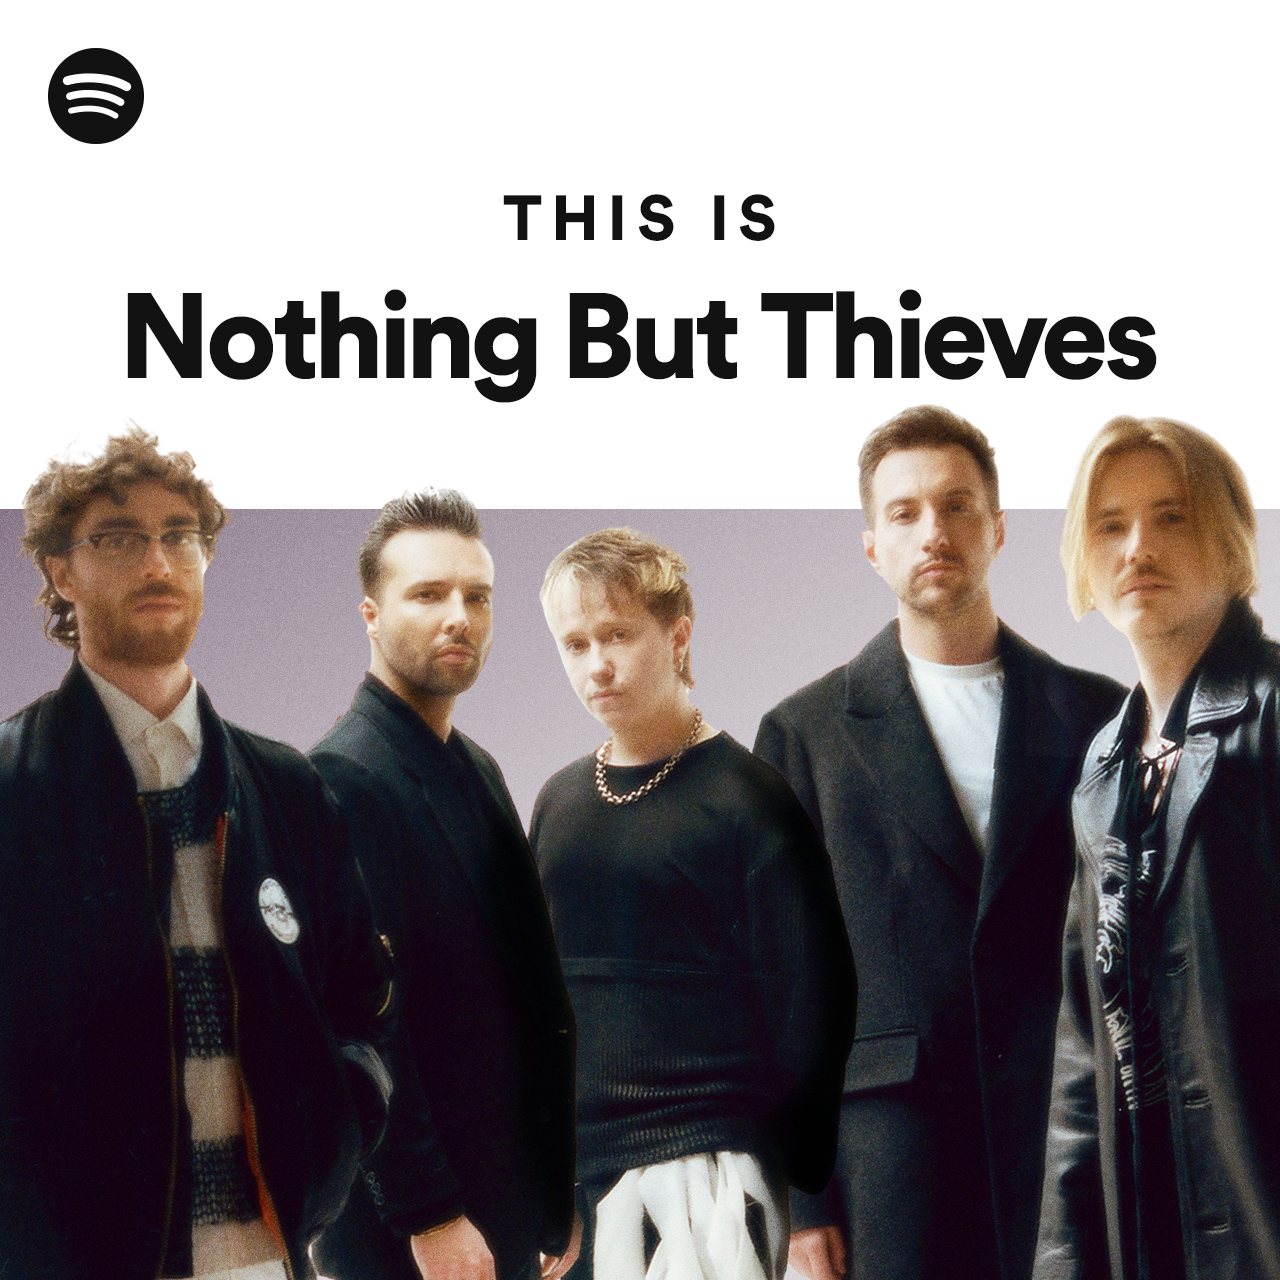 Nothing But Thieves Extend 2023 Tour Dates Ticket Presale, 46 OFF